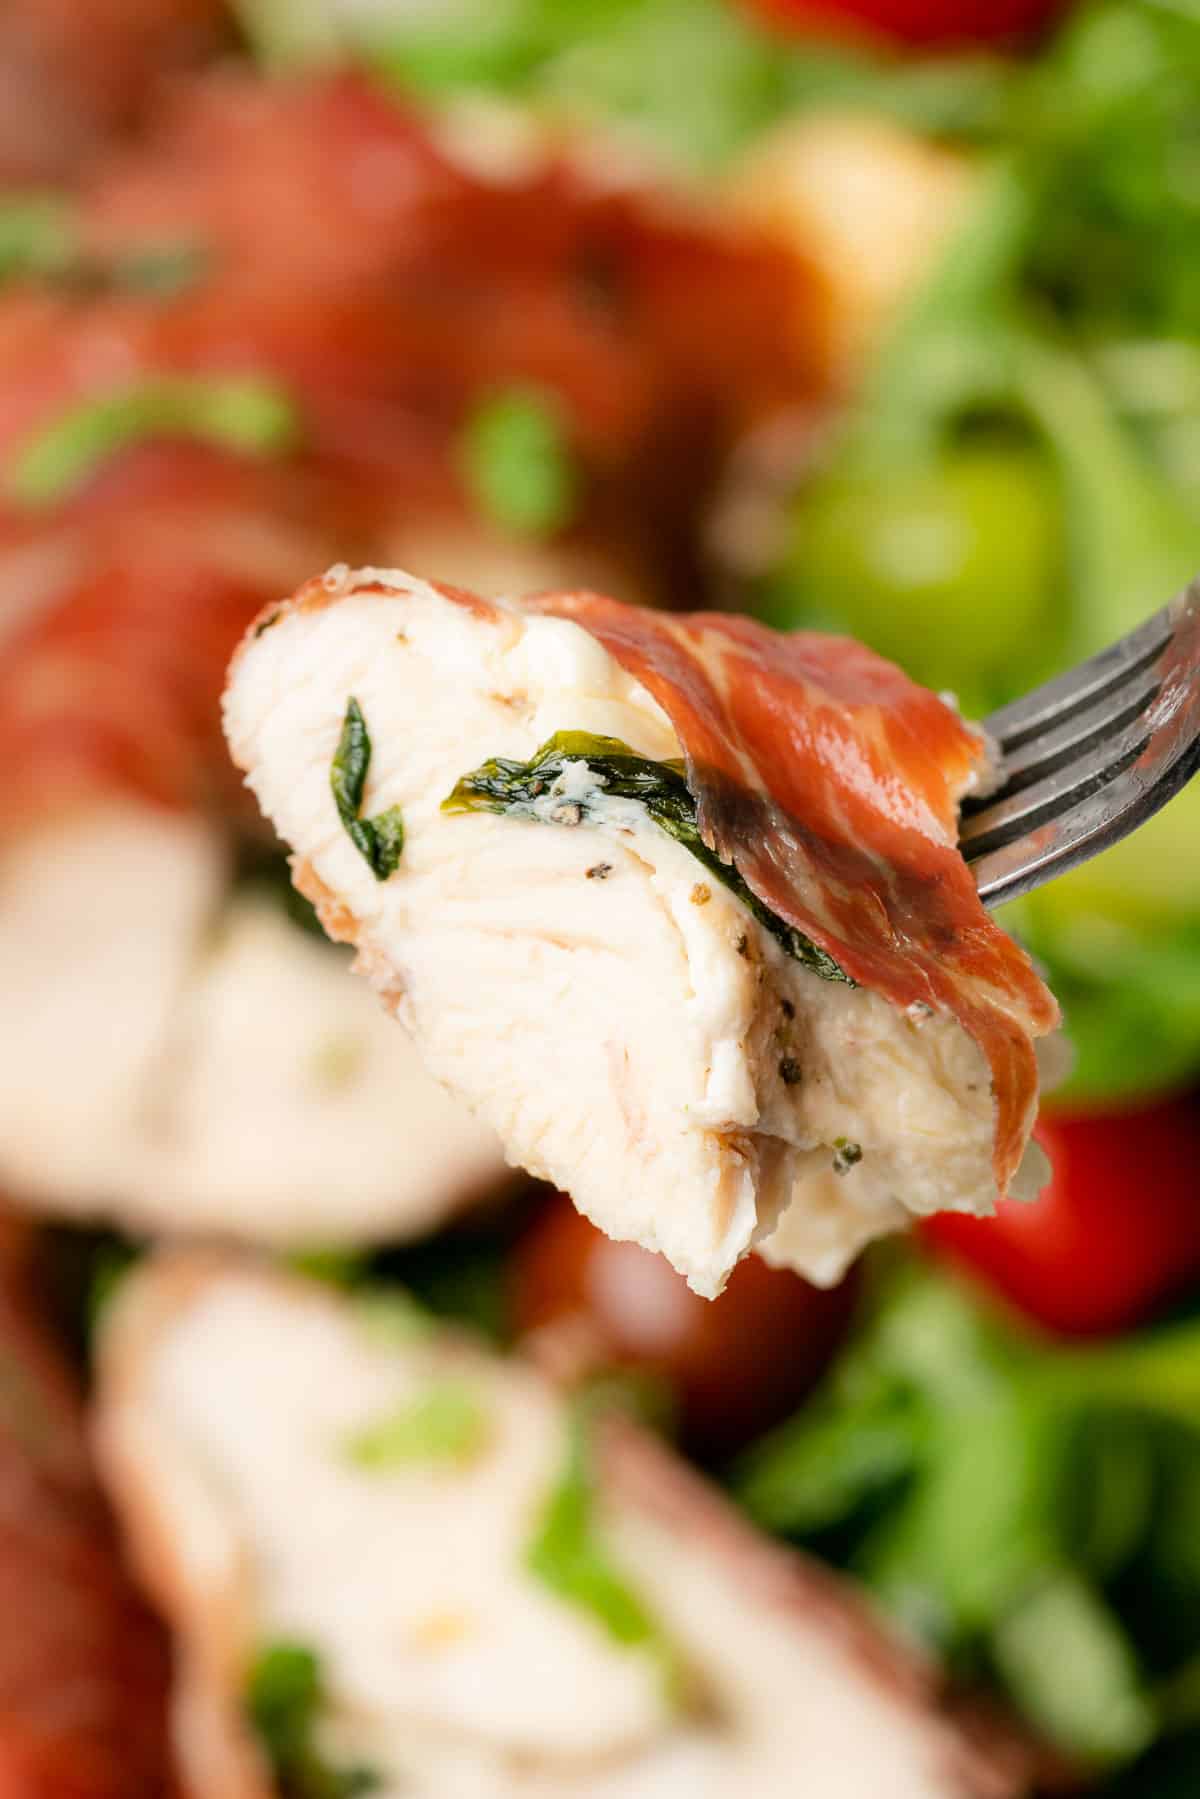 delicious and juicy forkful of chicken stuffed with mozzarella and wrapped in parma ham